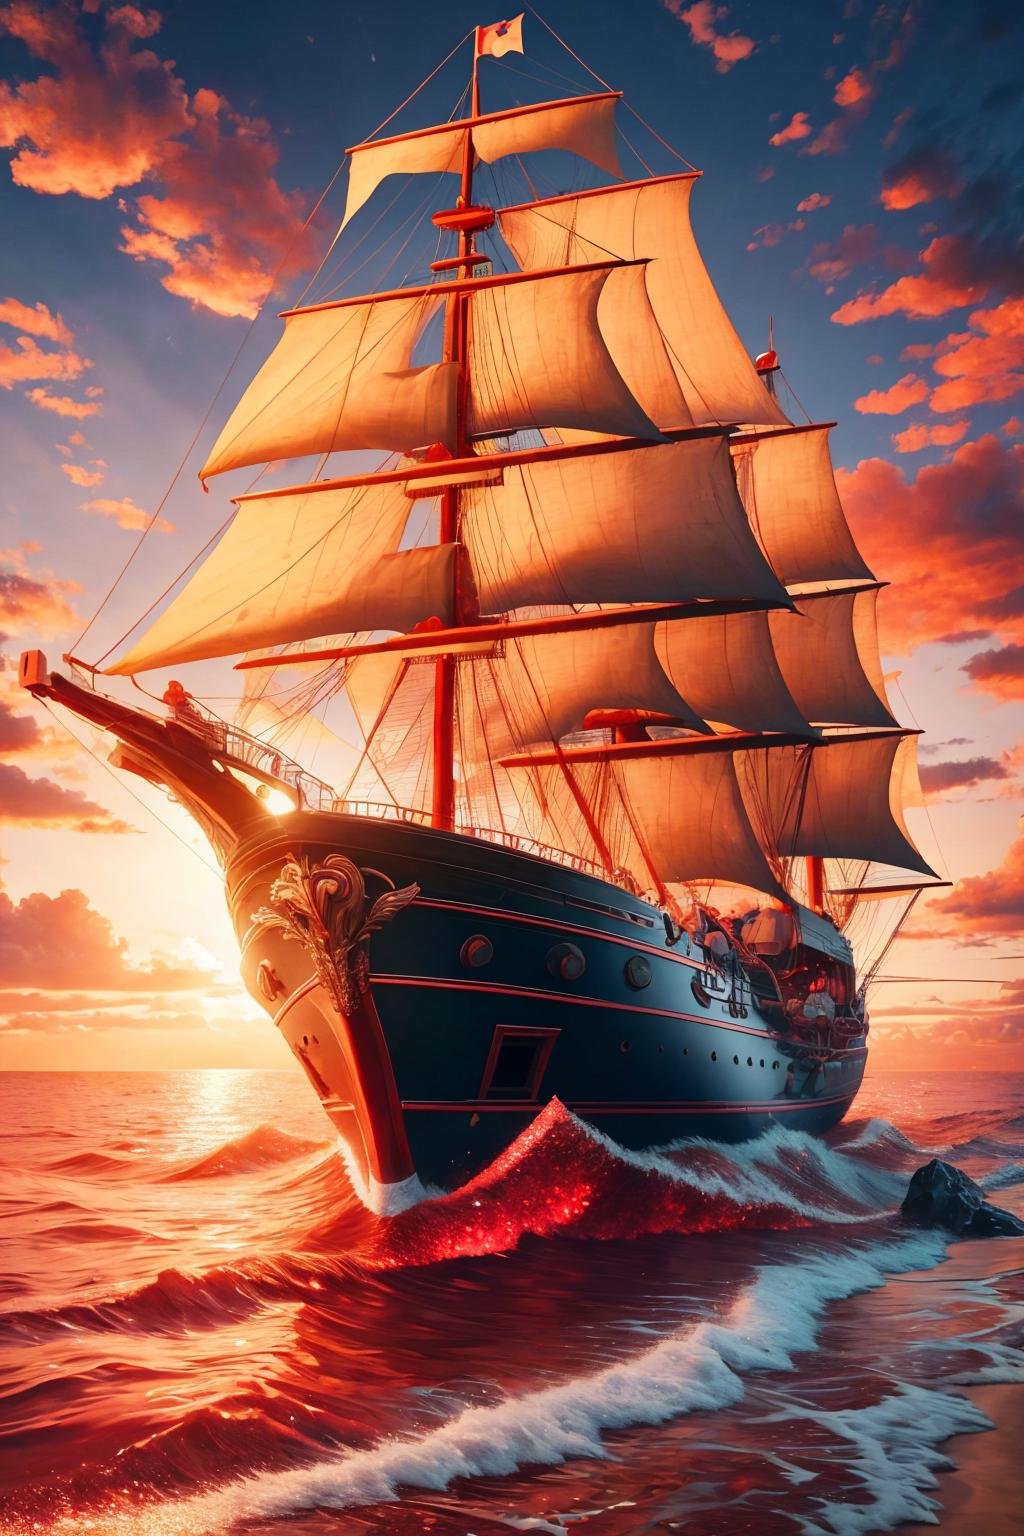 masterpiece, best quality, <lora:redglitter-style-richy-v1:1> redglitterstyle, ship, ocean, water, red theme, sunset, sailing ship, pirate ship, red sails